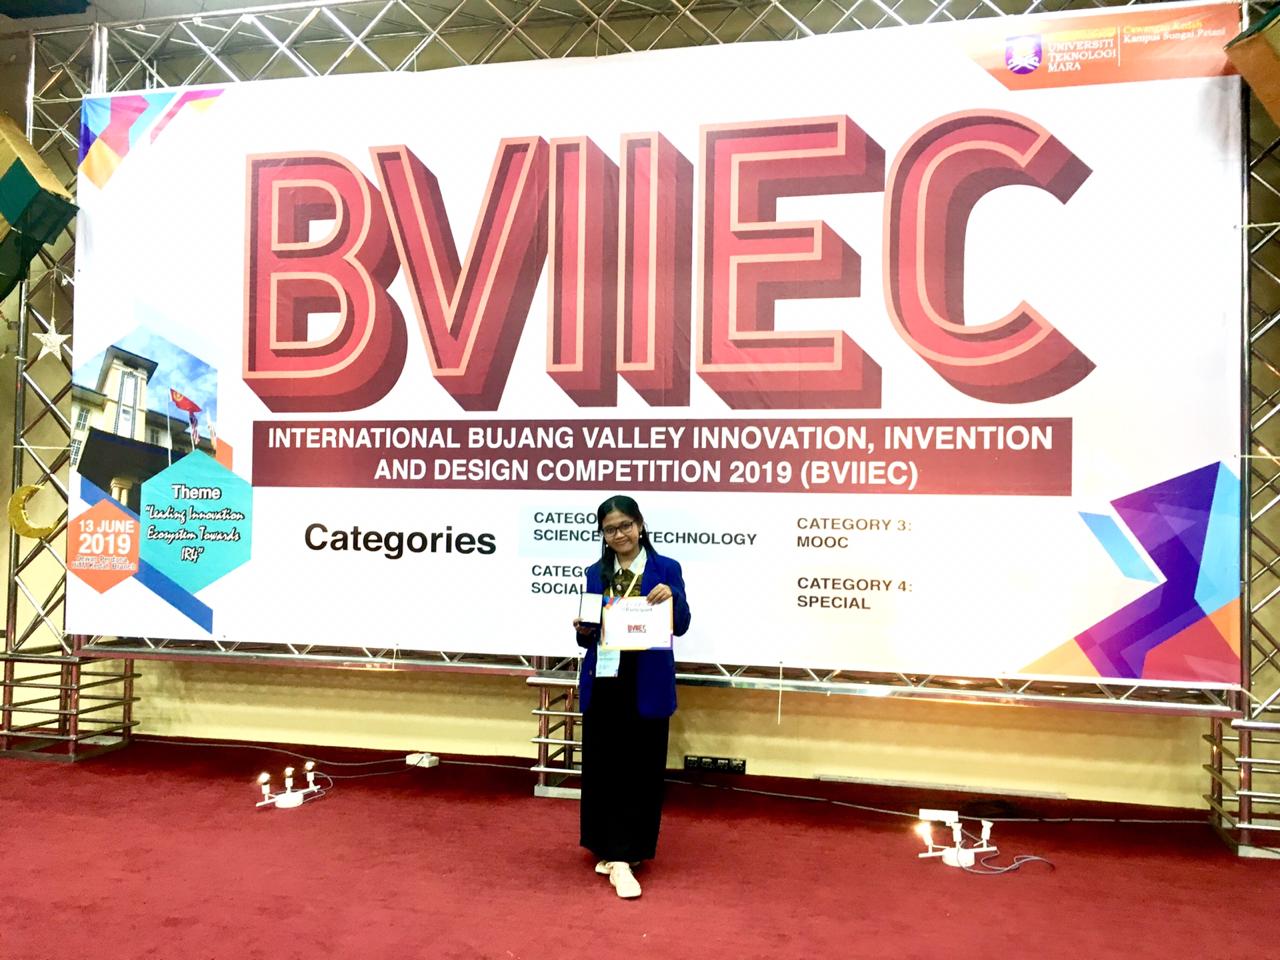 Foto International Bujang Valley Innovation, Invention, and Design Competition 2019 (BVIIEC)